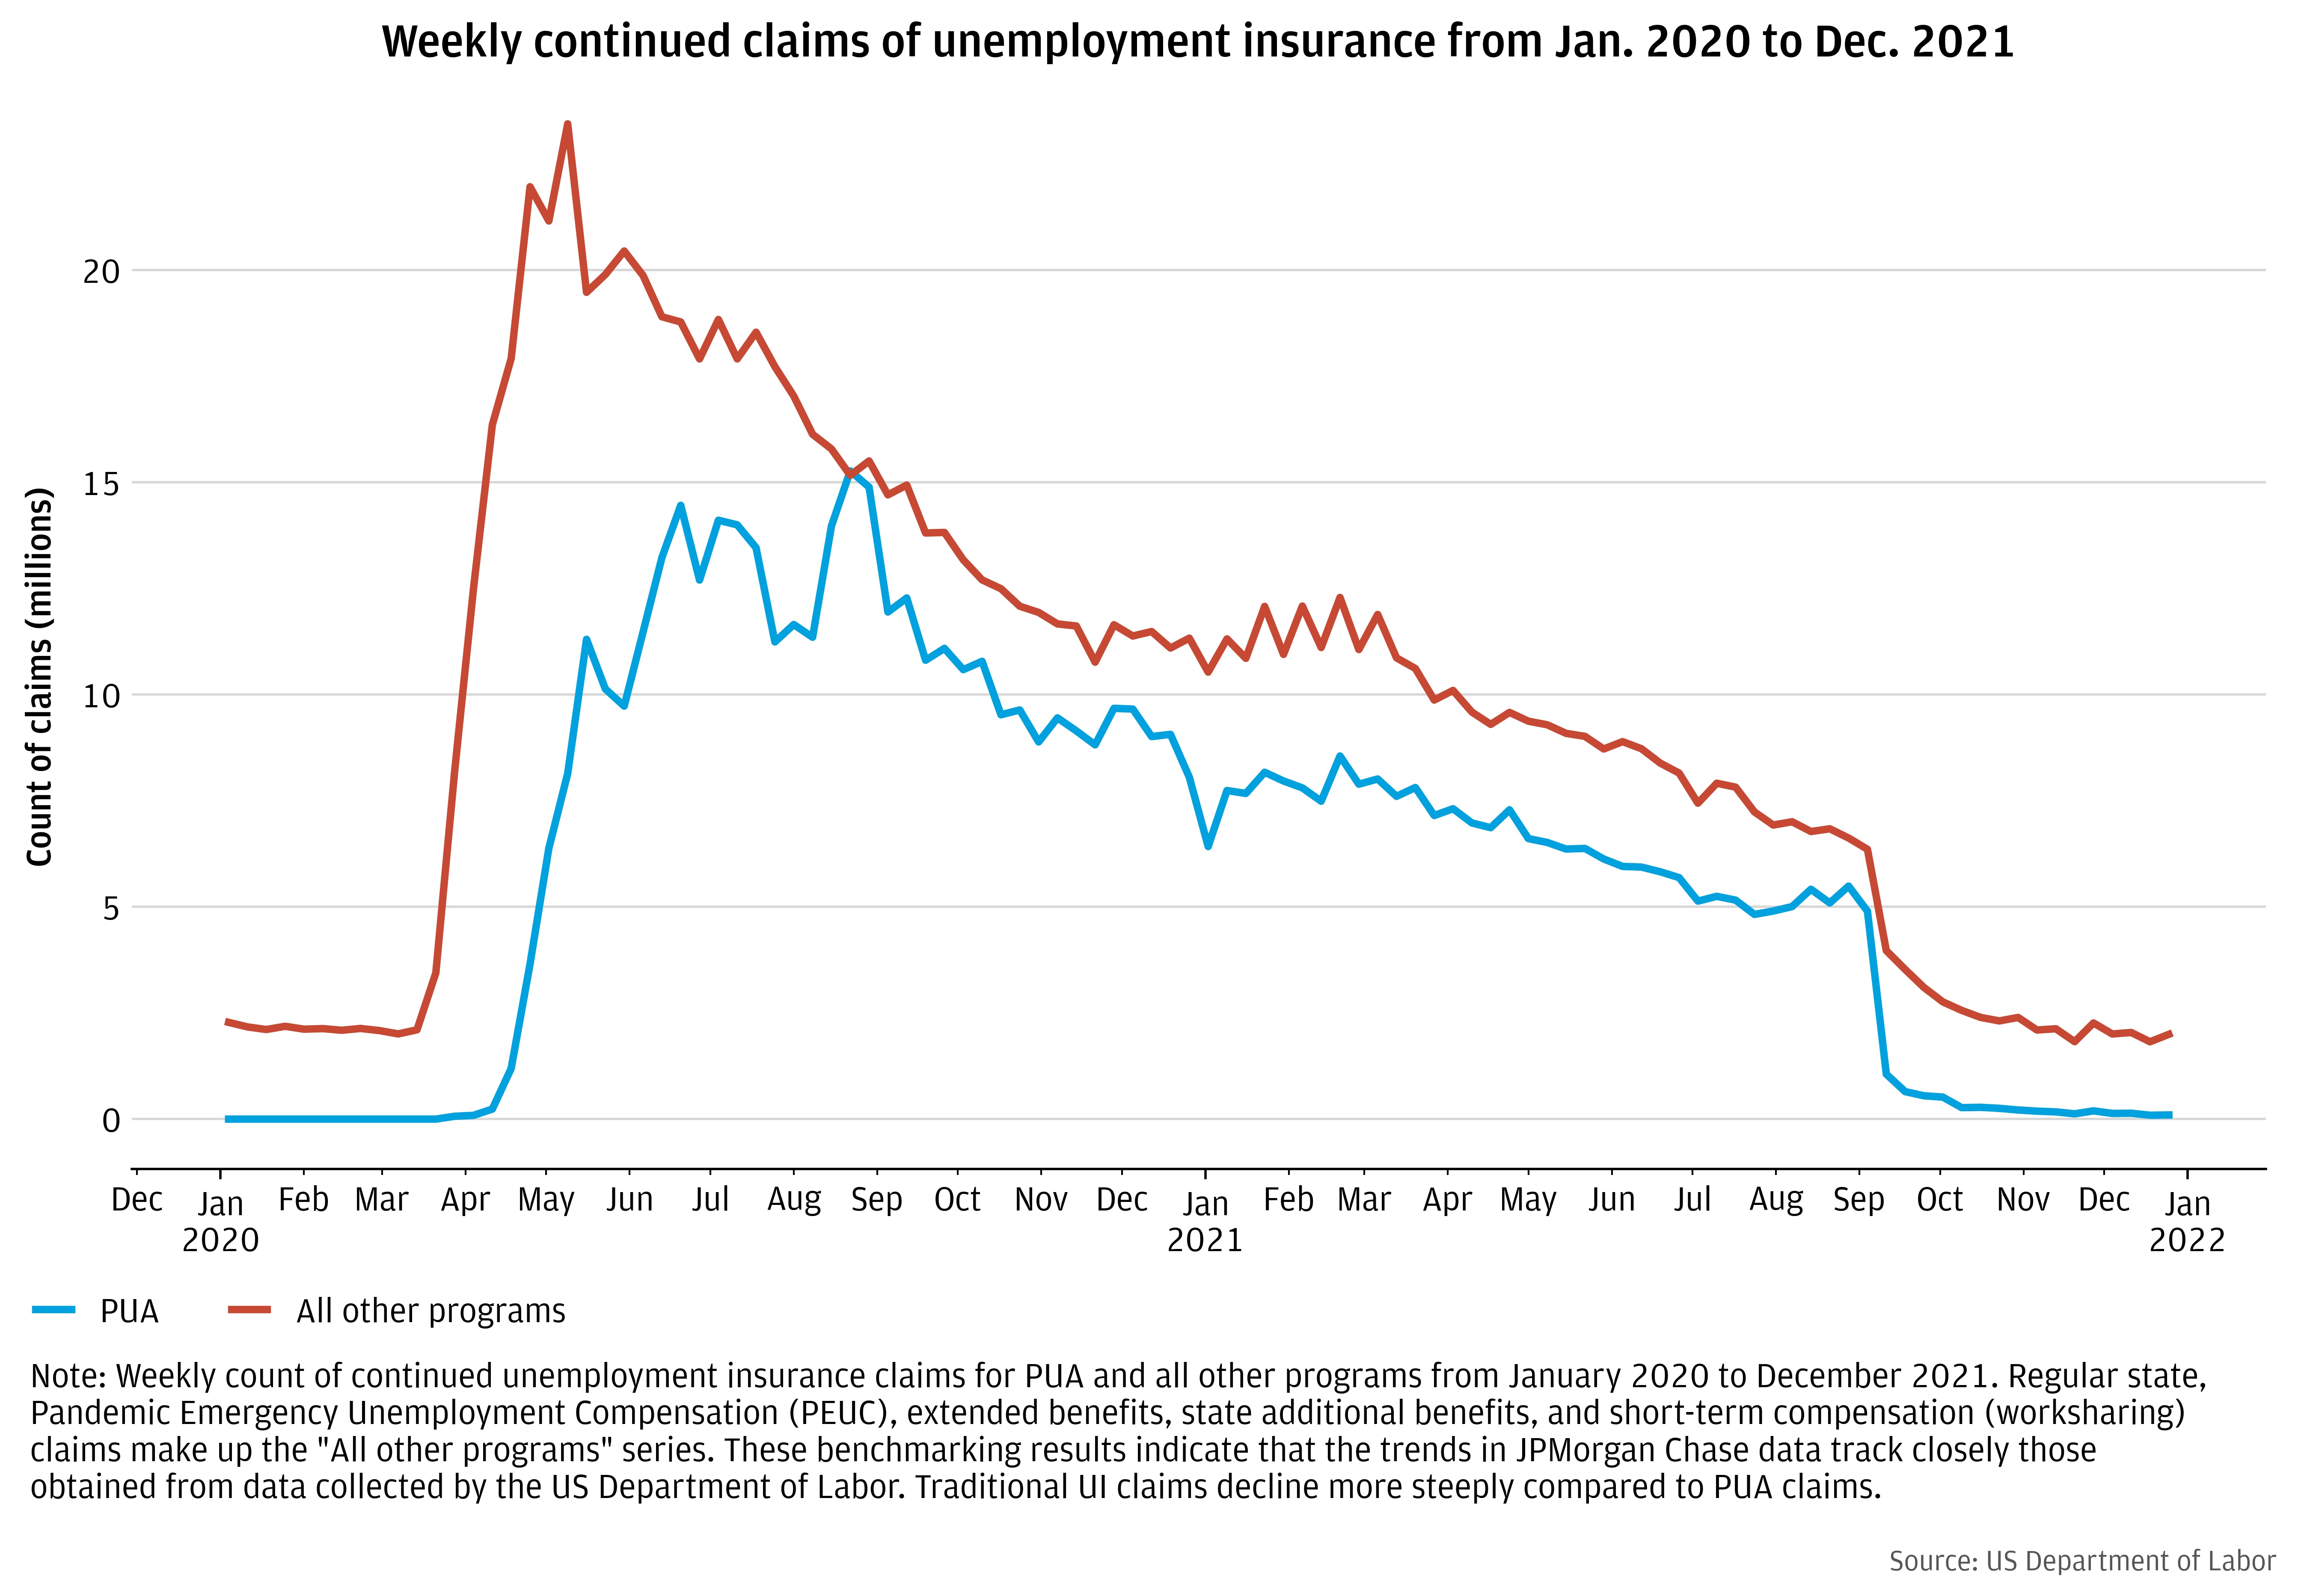 Continuing unemployment insurance claims in all programs, 2020-2021